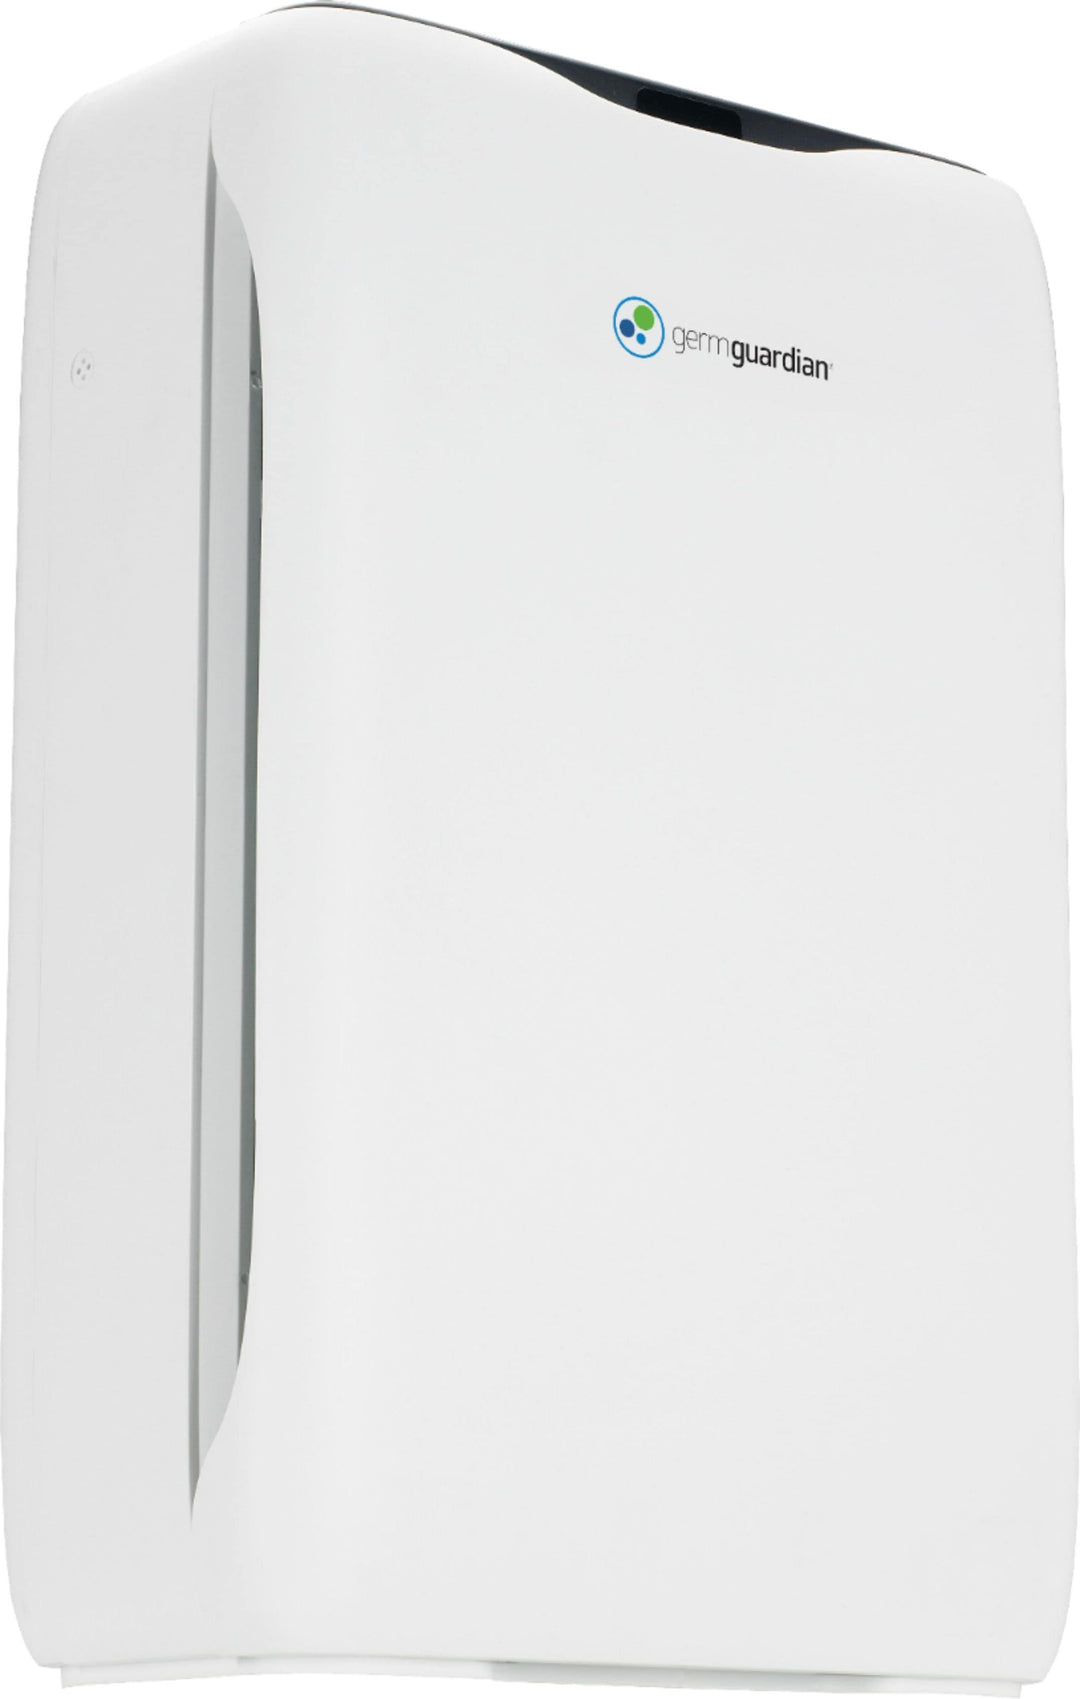 GermGuardian - 151 Sq. Ft Console Air Purifier - White_8